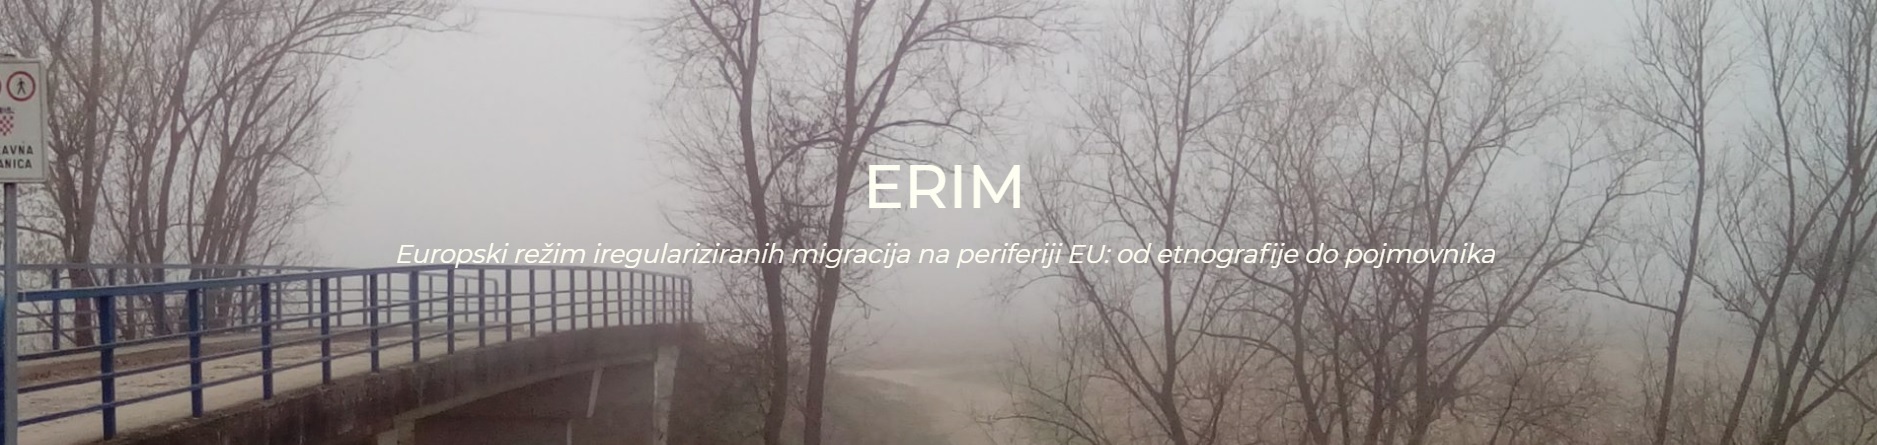 Presentation of the research project “European Irregularized Migrations Regime - from Ethnography to Keywords” (ERIM)